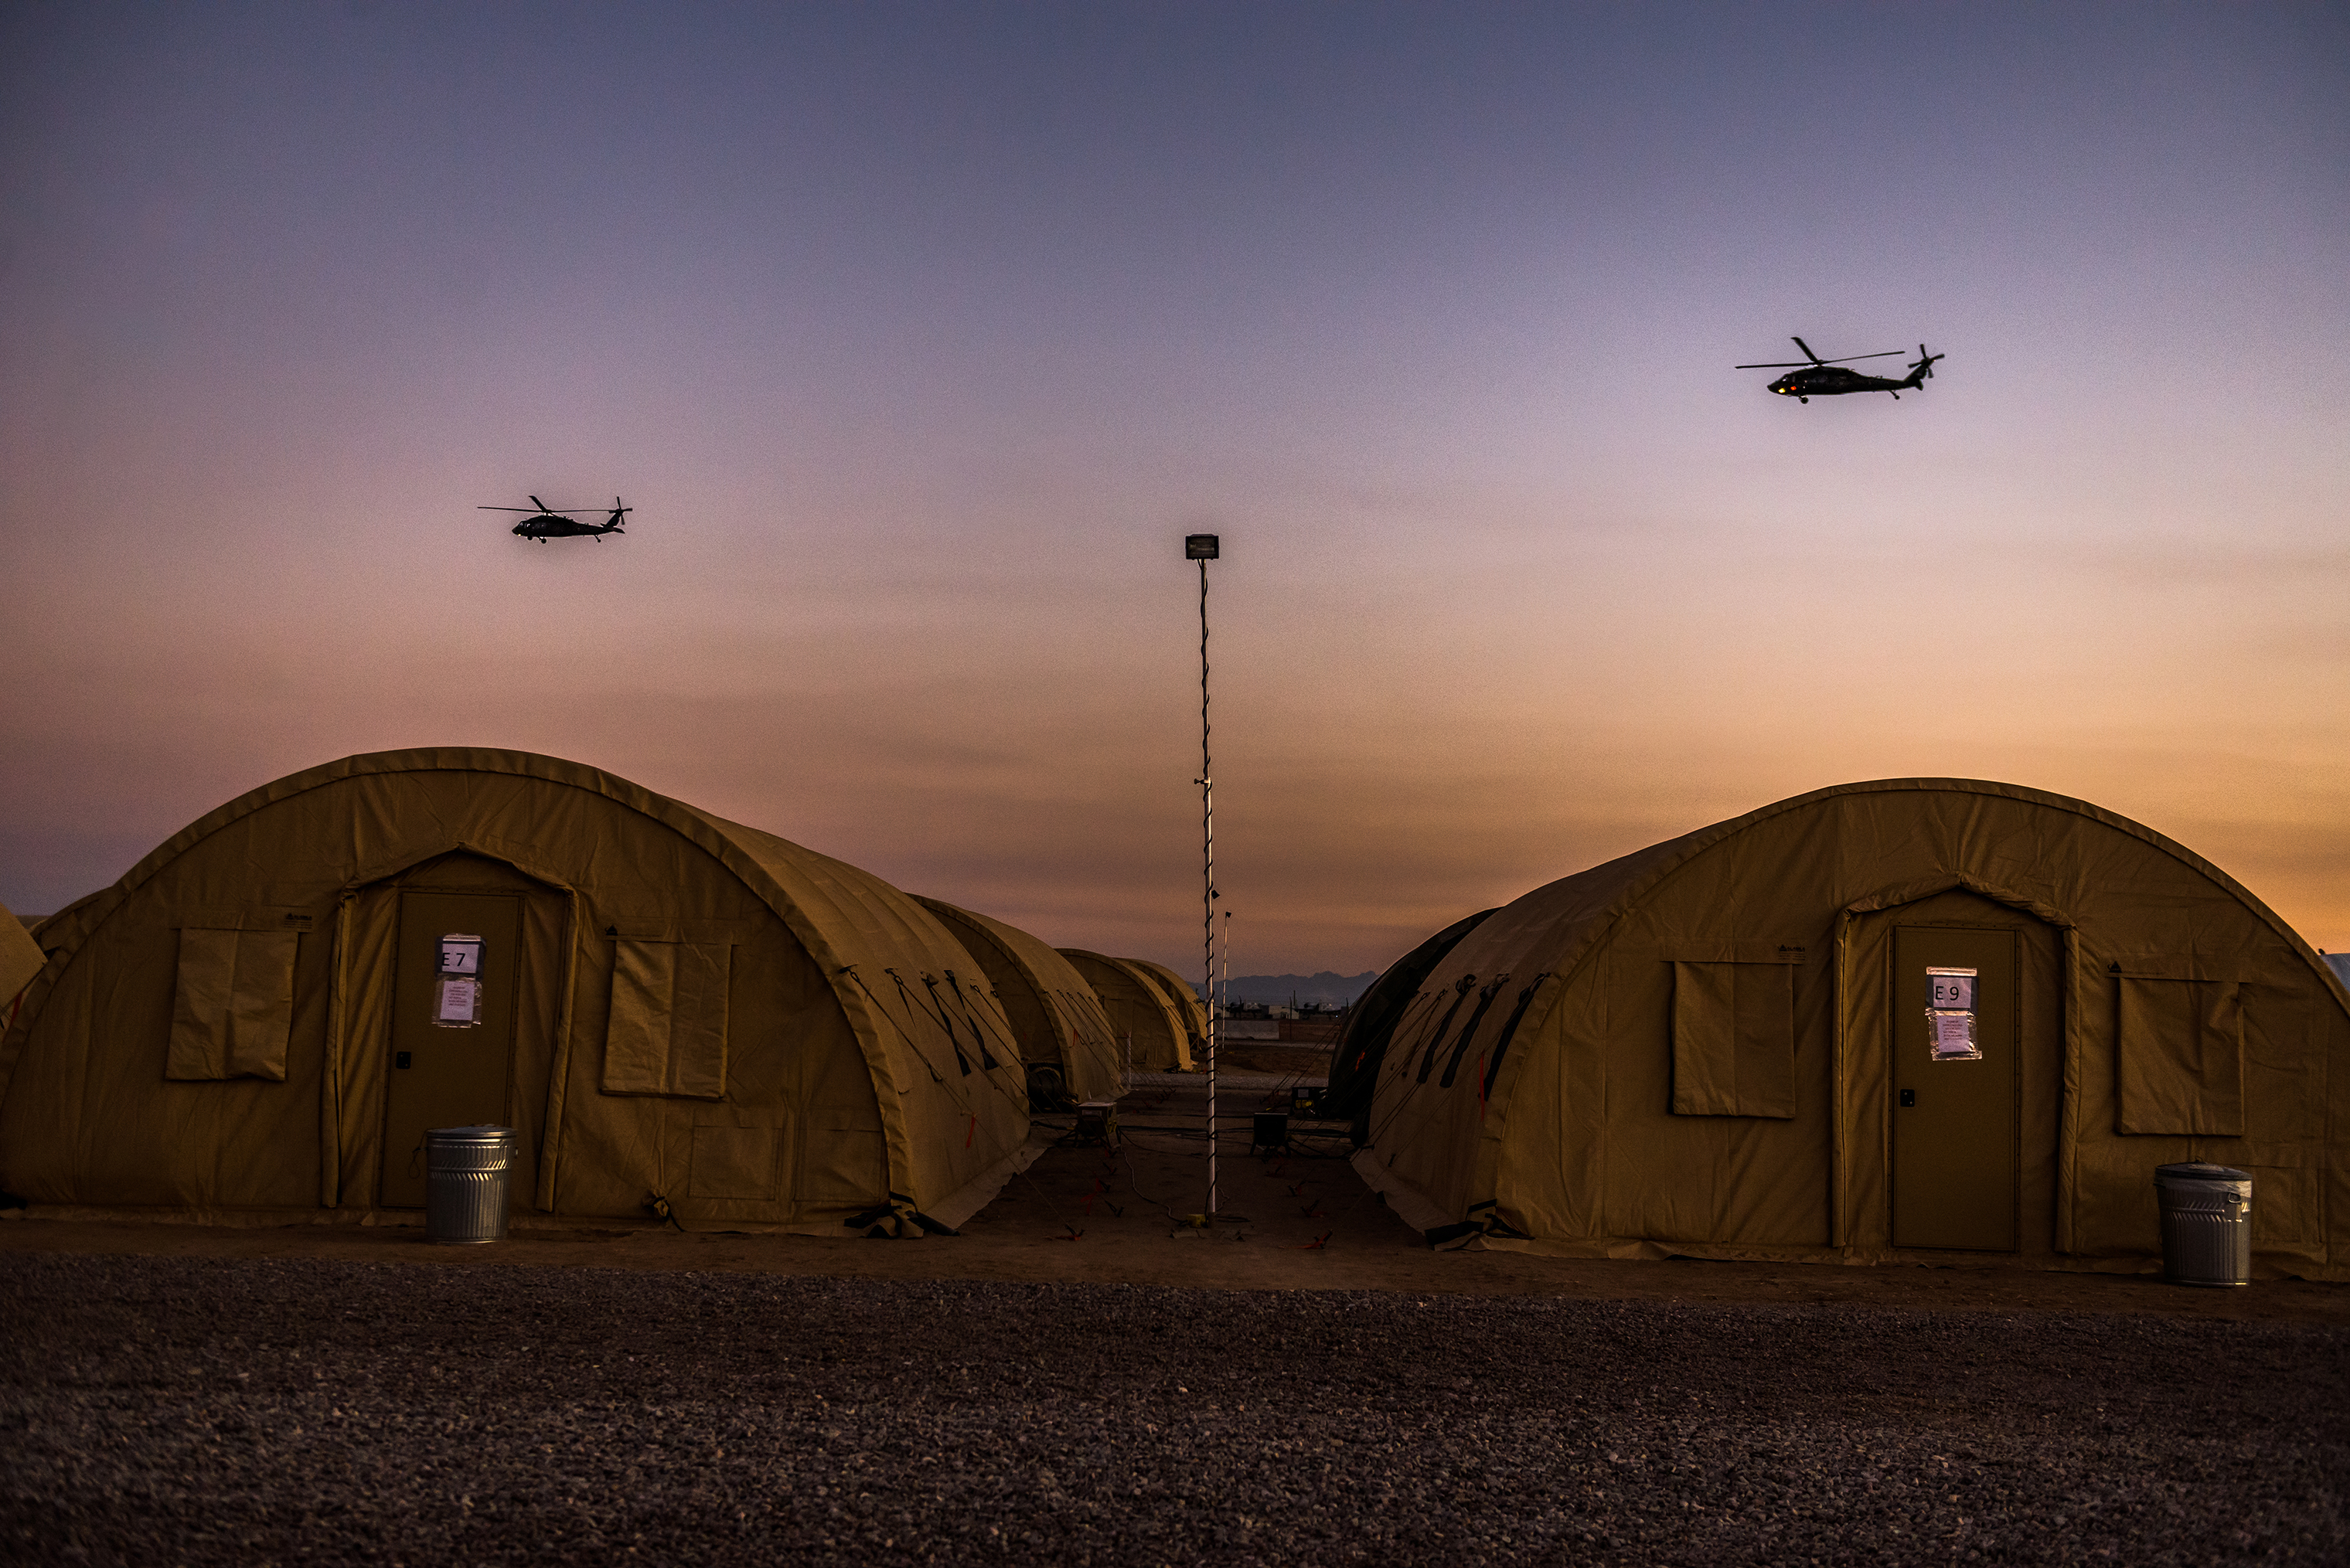 Helicopters fly over rapidly assembled tents used for army sleeping quarters. (Meridith Kohut for TIME)